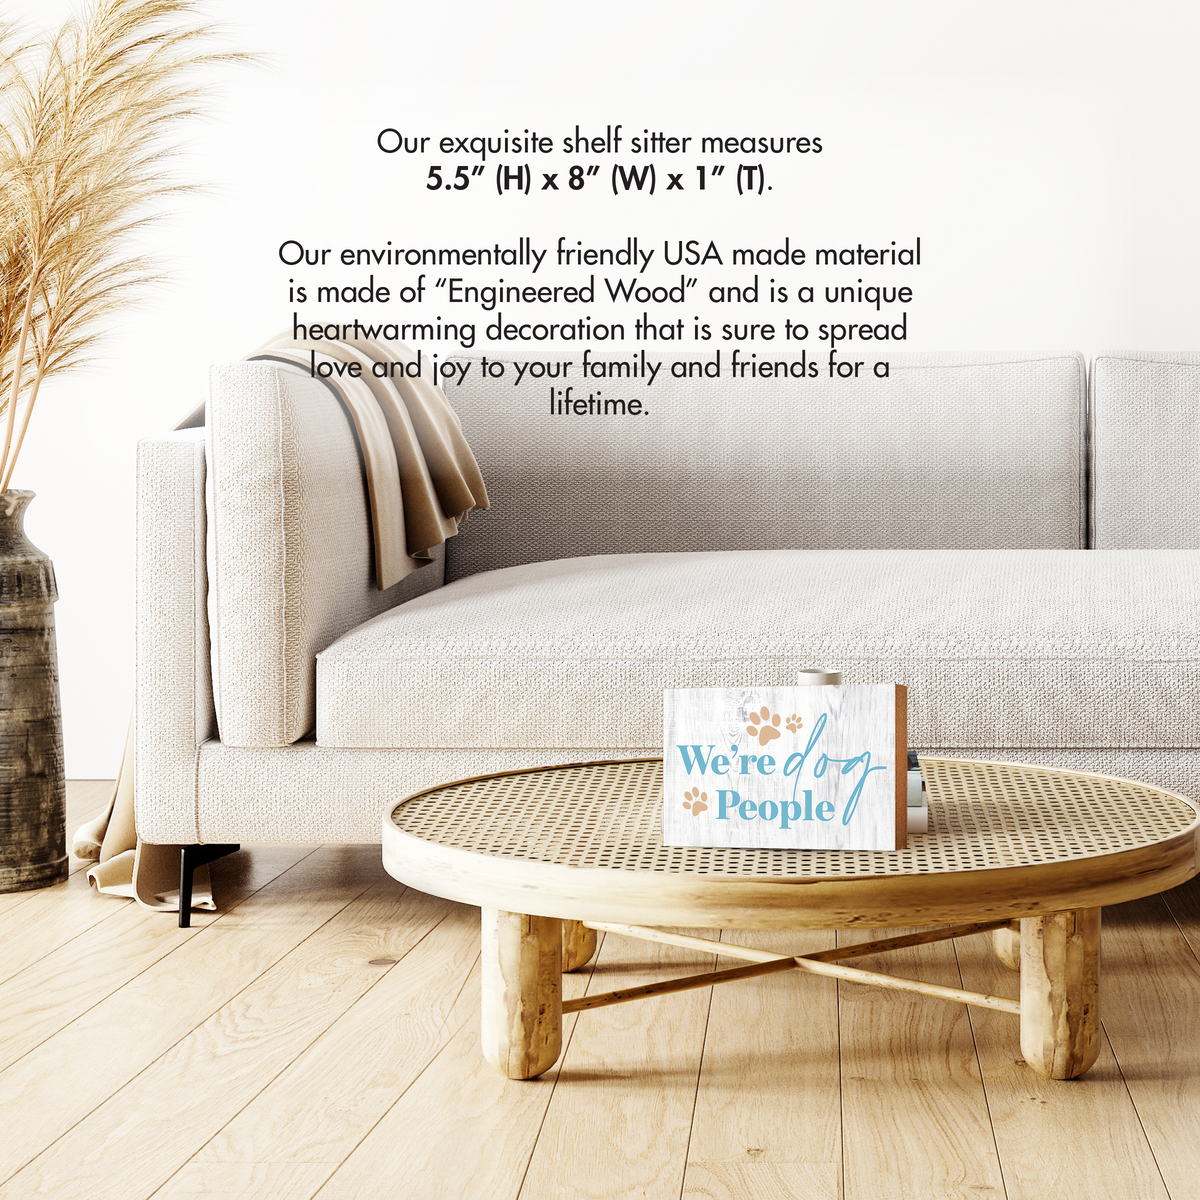 Wooden Shelf Decor and Tabletop Signs with Pet Verses - We&#39;re Dog People